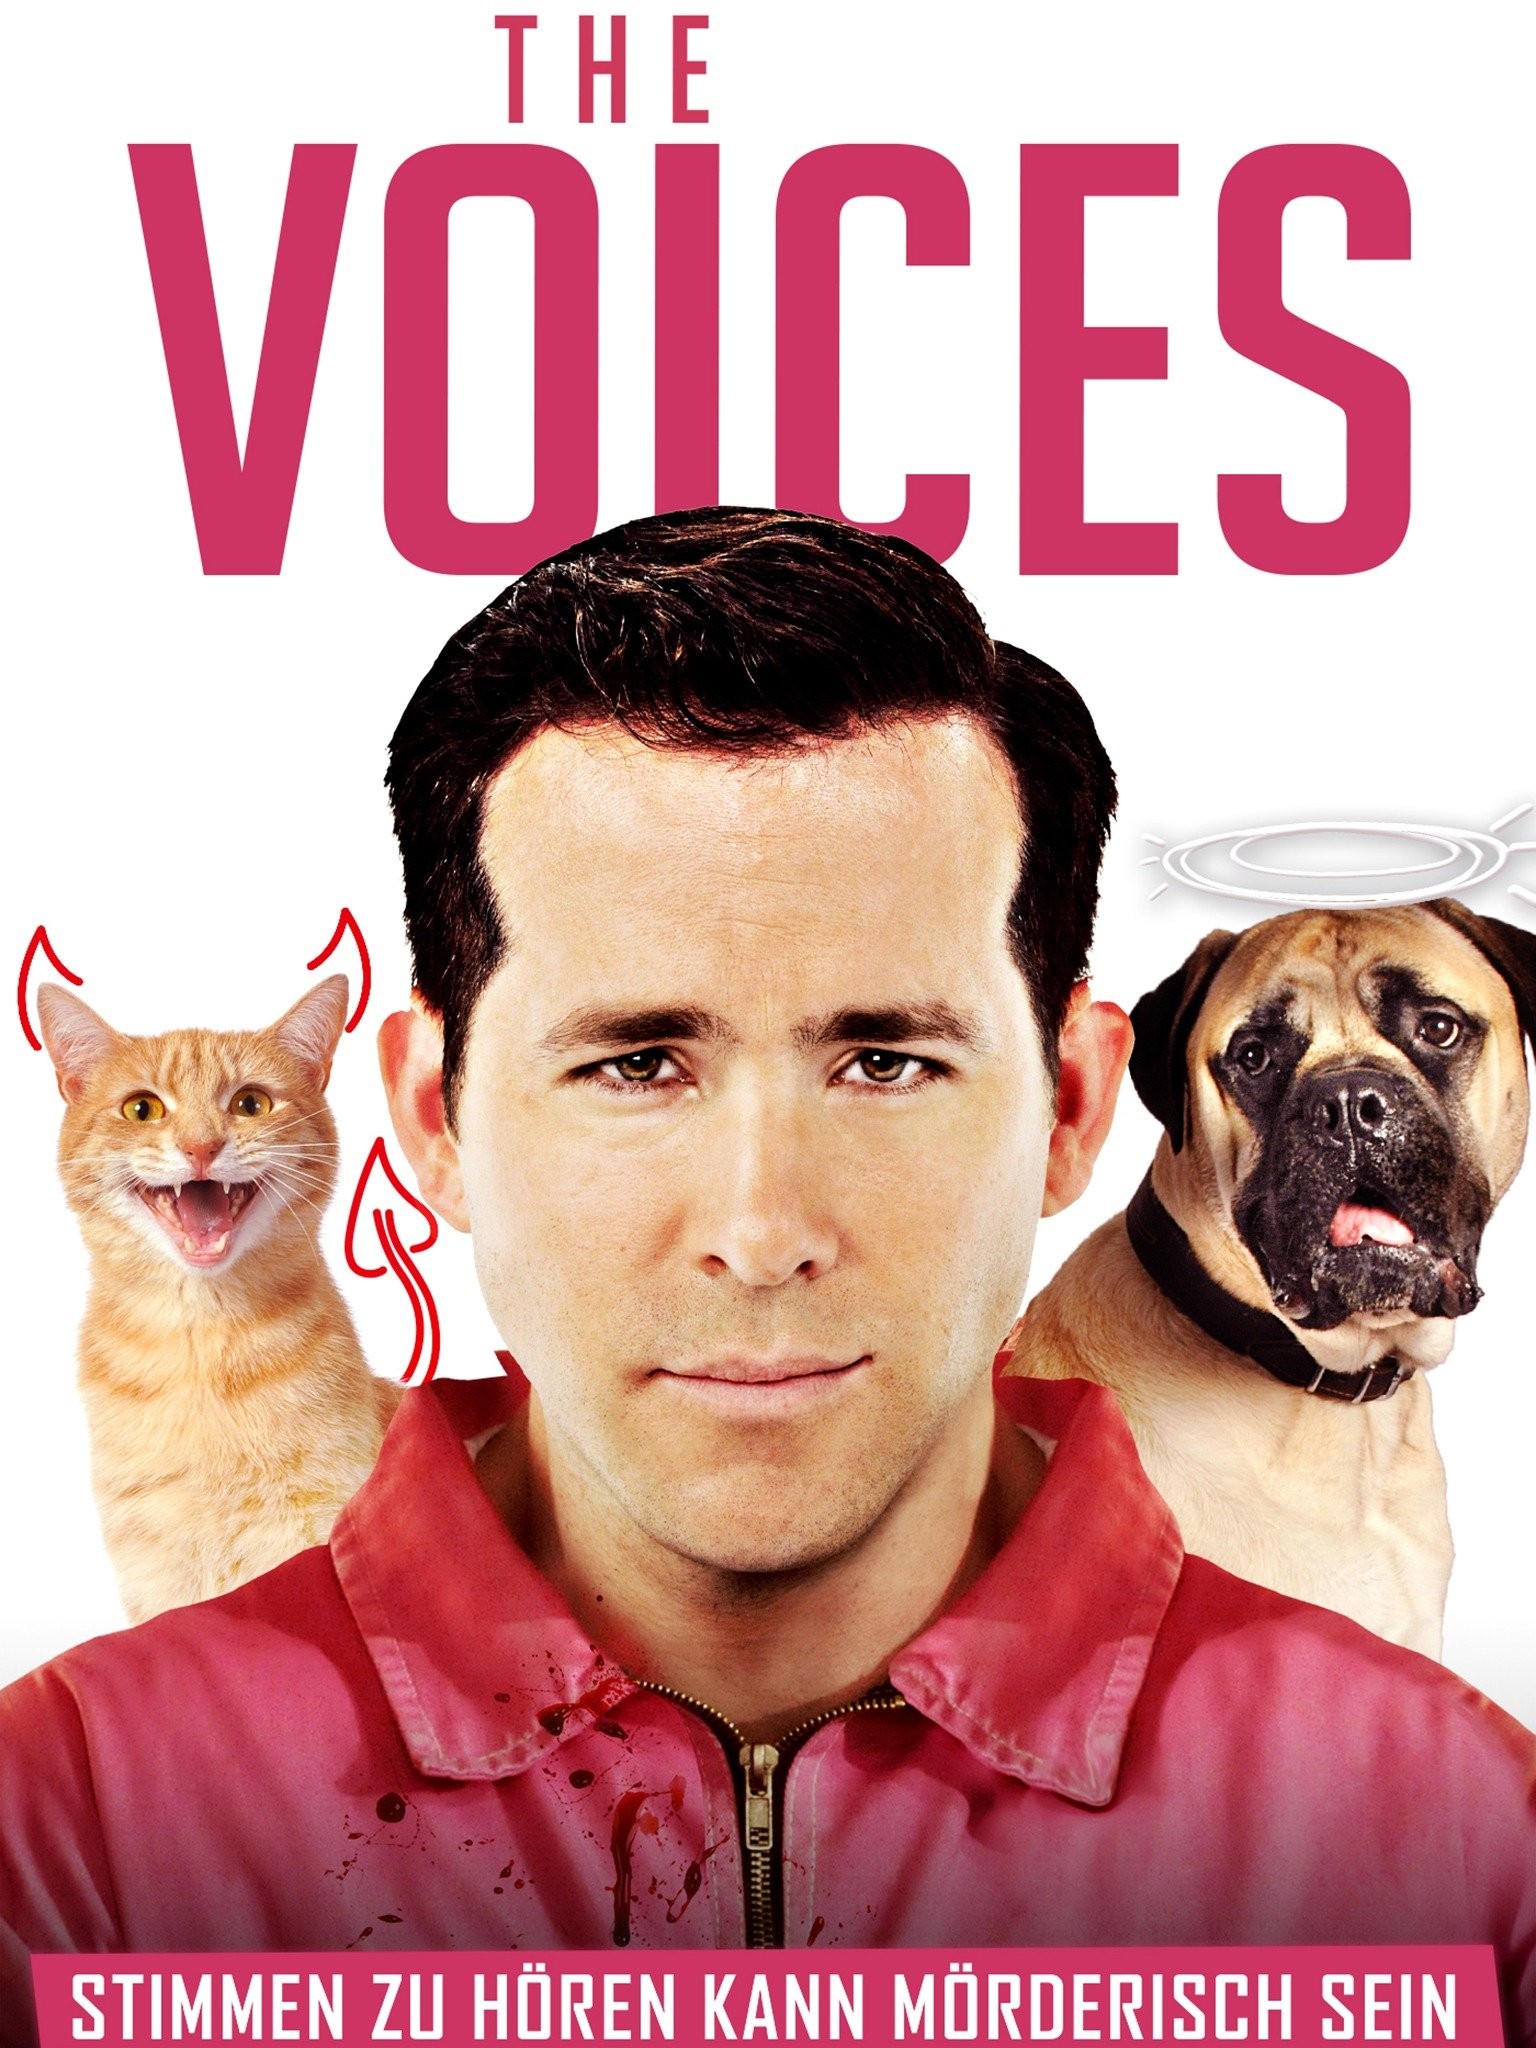 Ryan Reynolds Hears 'The Voices' in New Trailer - mxdwn Movies